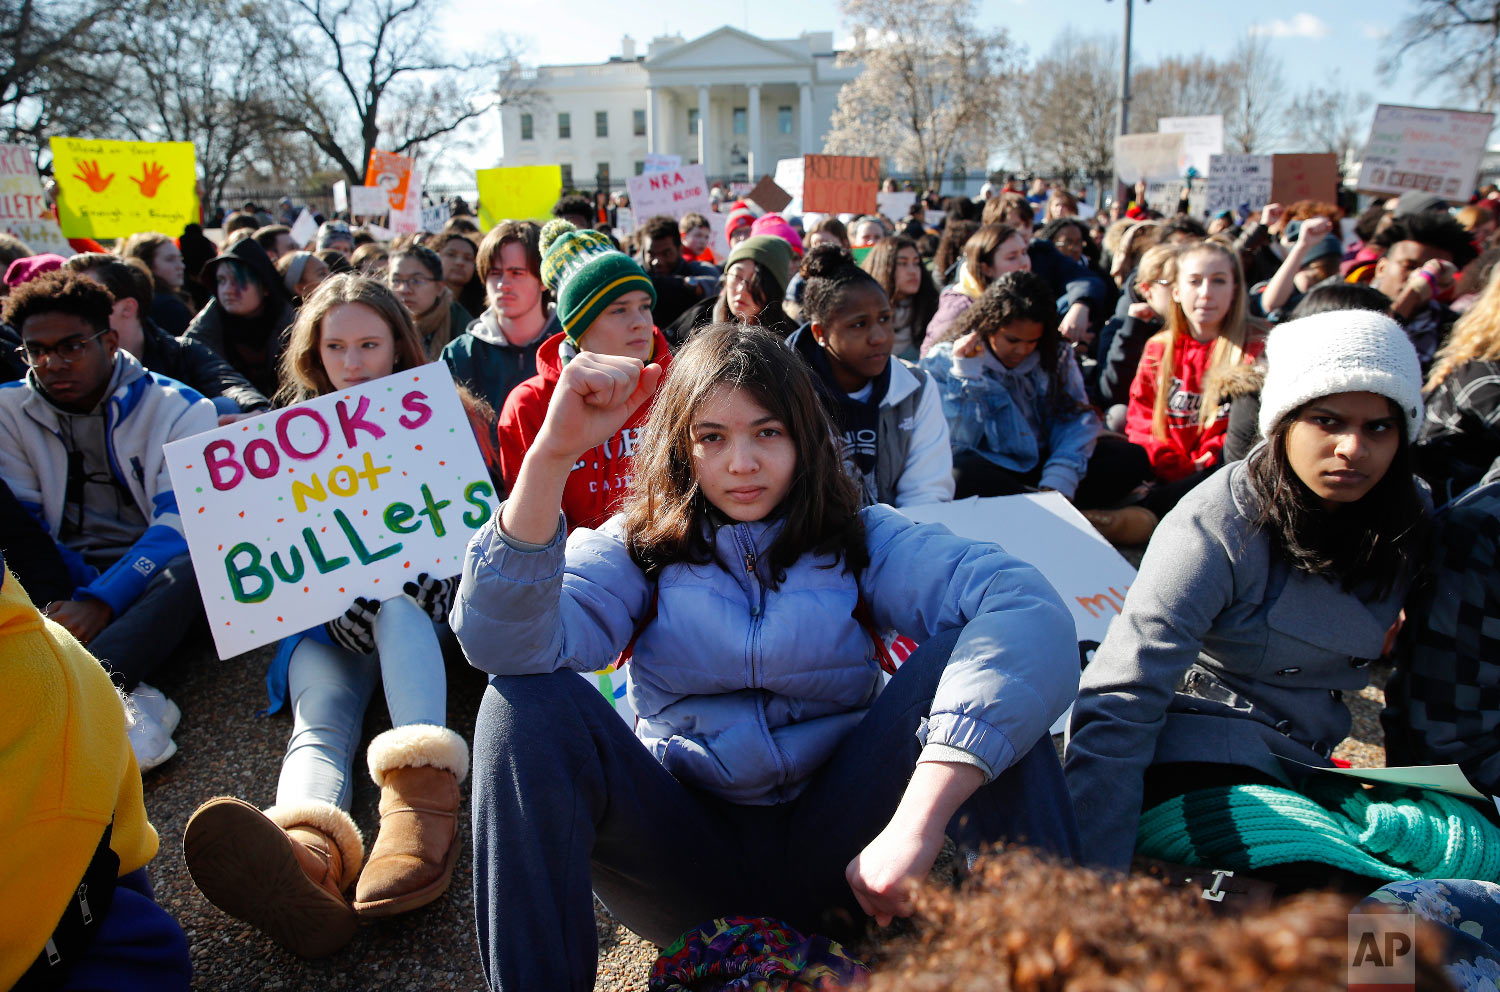  Students who walked out of school to protest gun violence participate in a demonstration in front of the White House in Washington on March 14, 2018. The protest was in response to the massacre of 17 people at Florida's Marjory Stoneman Douglas High